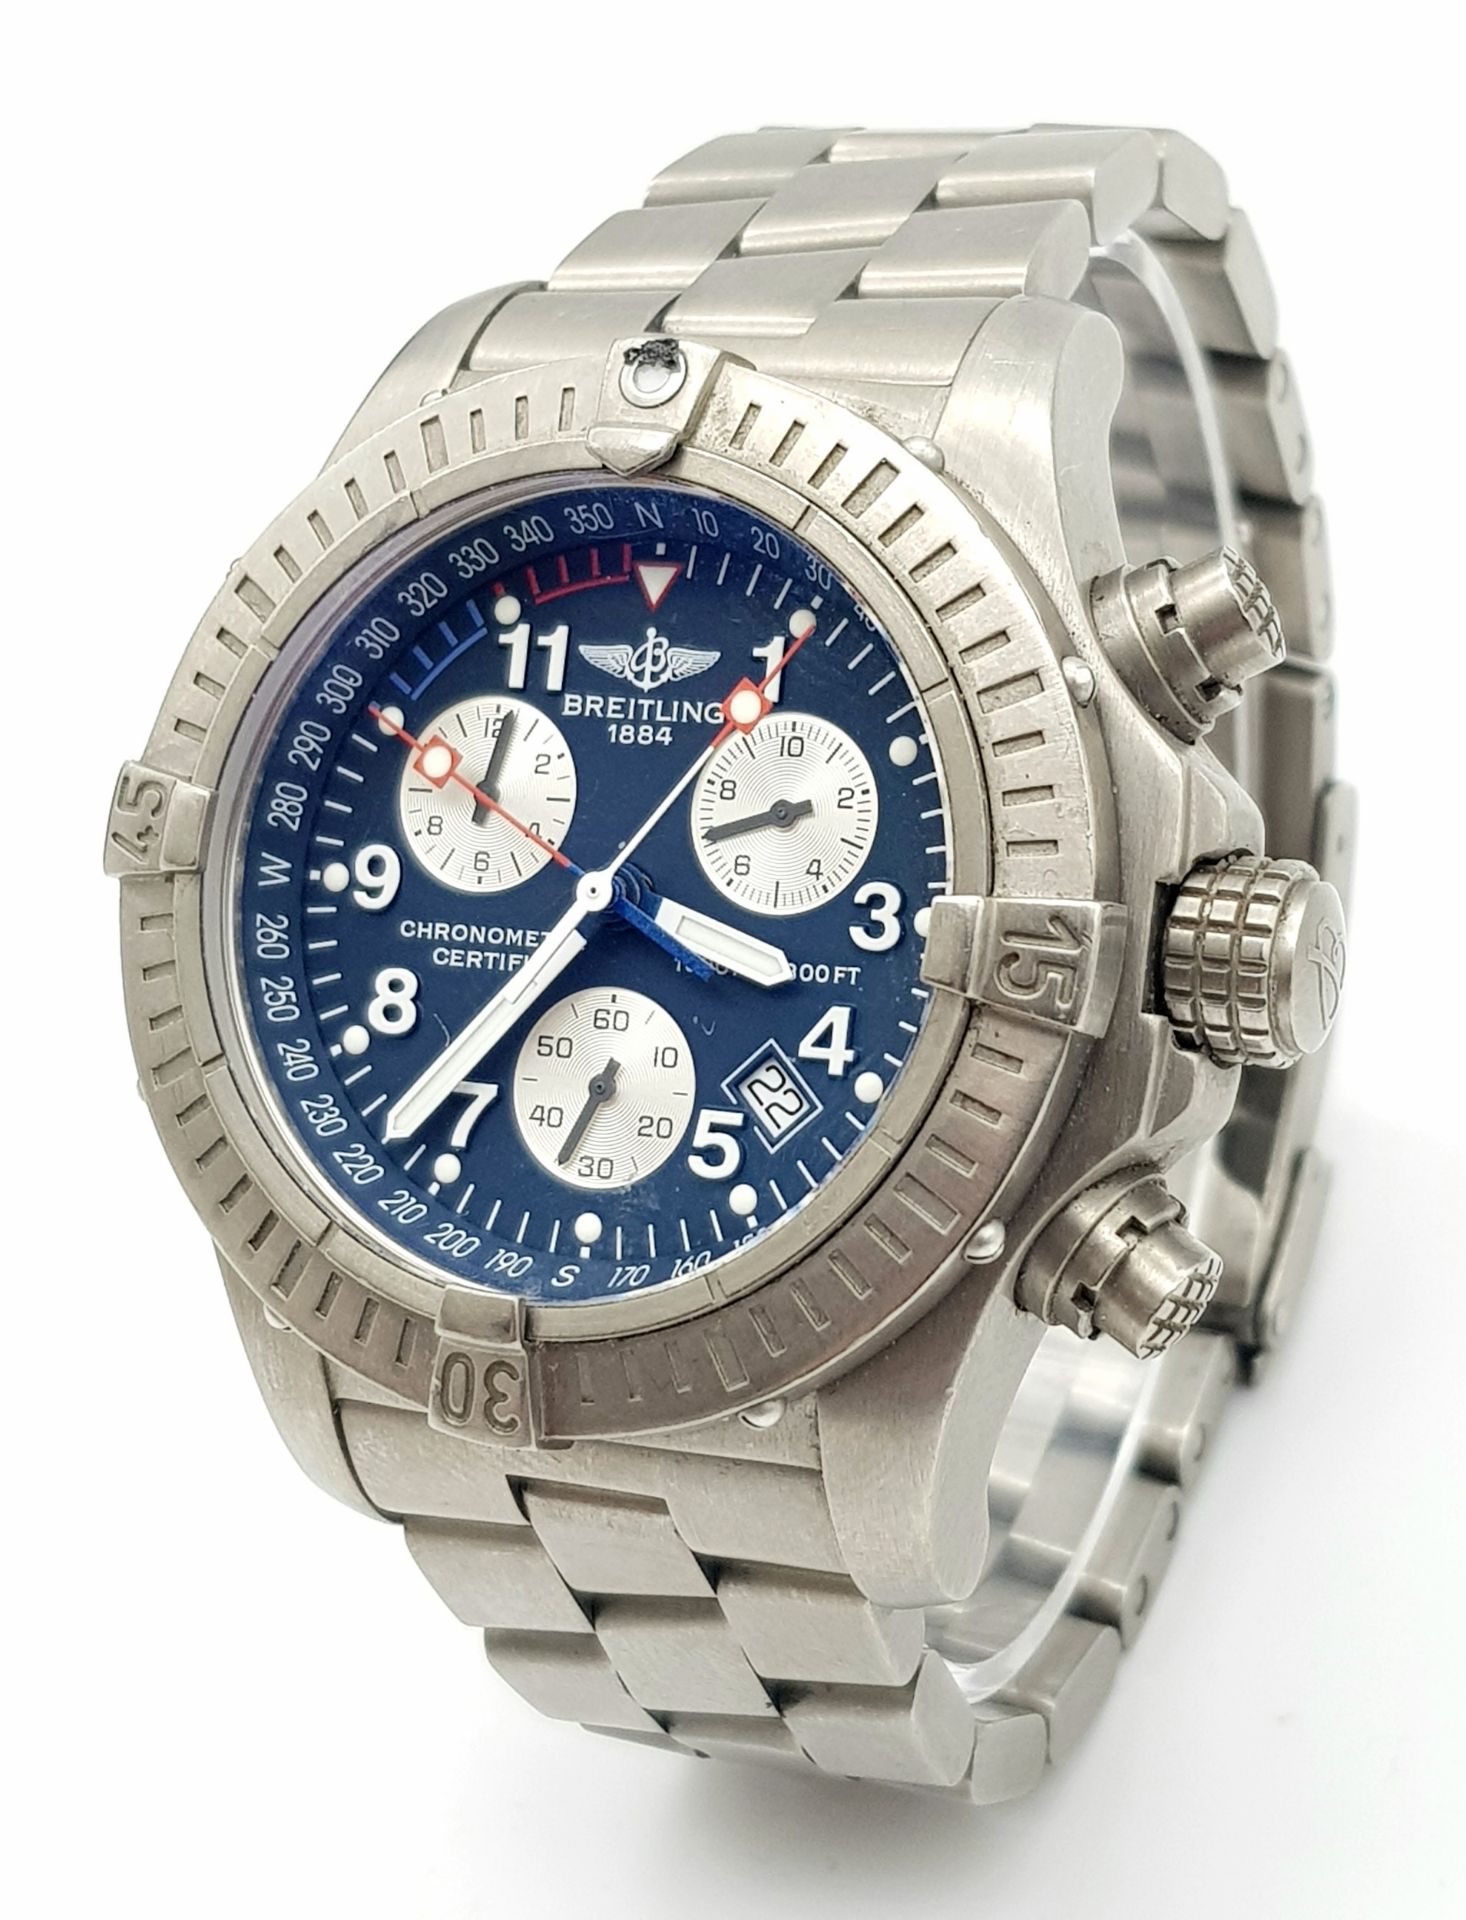 A BREITLING GTS CHRONOMETRE IN STAINLESS STEEL WITH BLUE FACE AND 3 SUBDIALS , AUTOMATIC